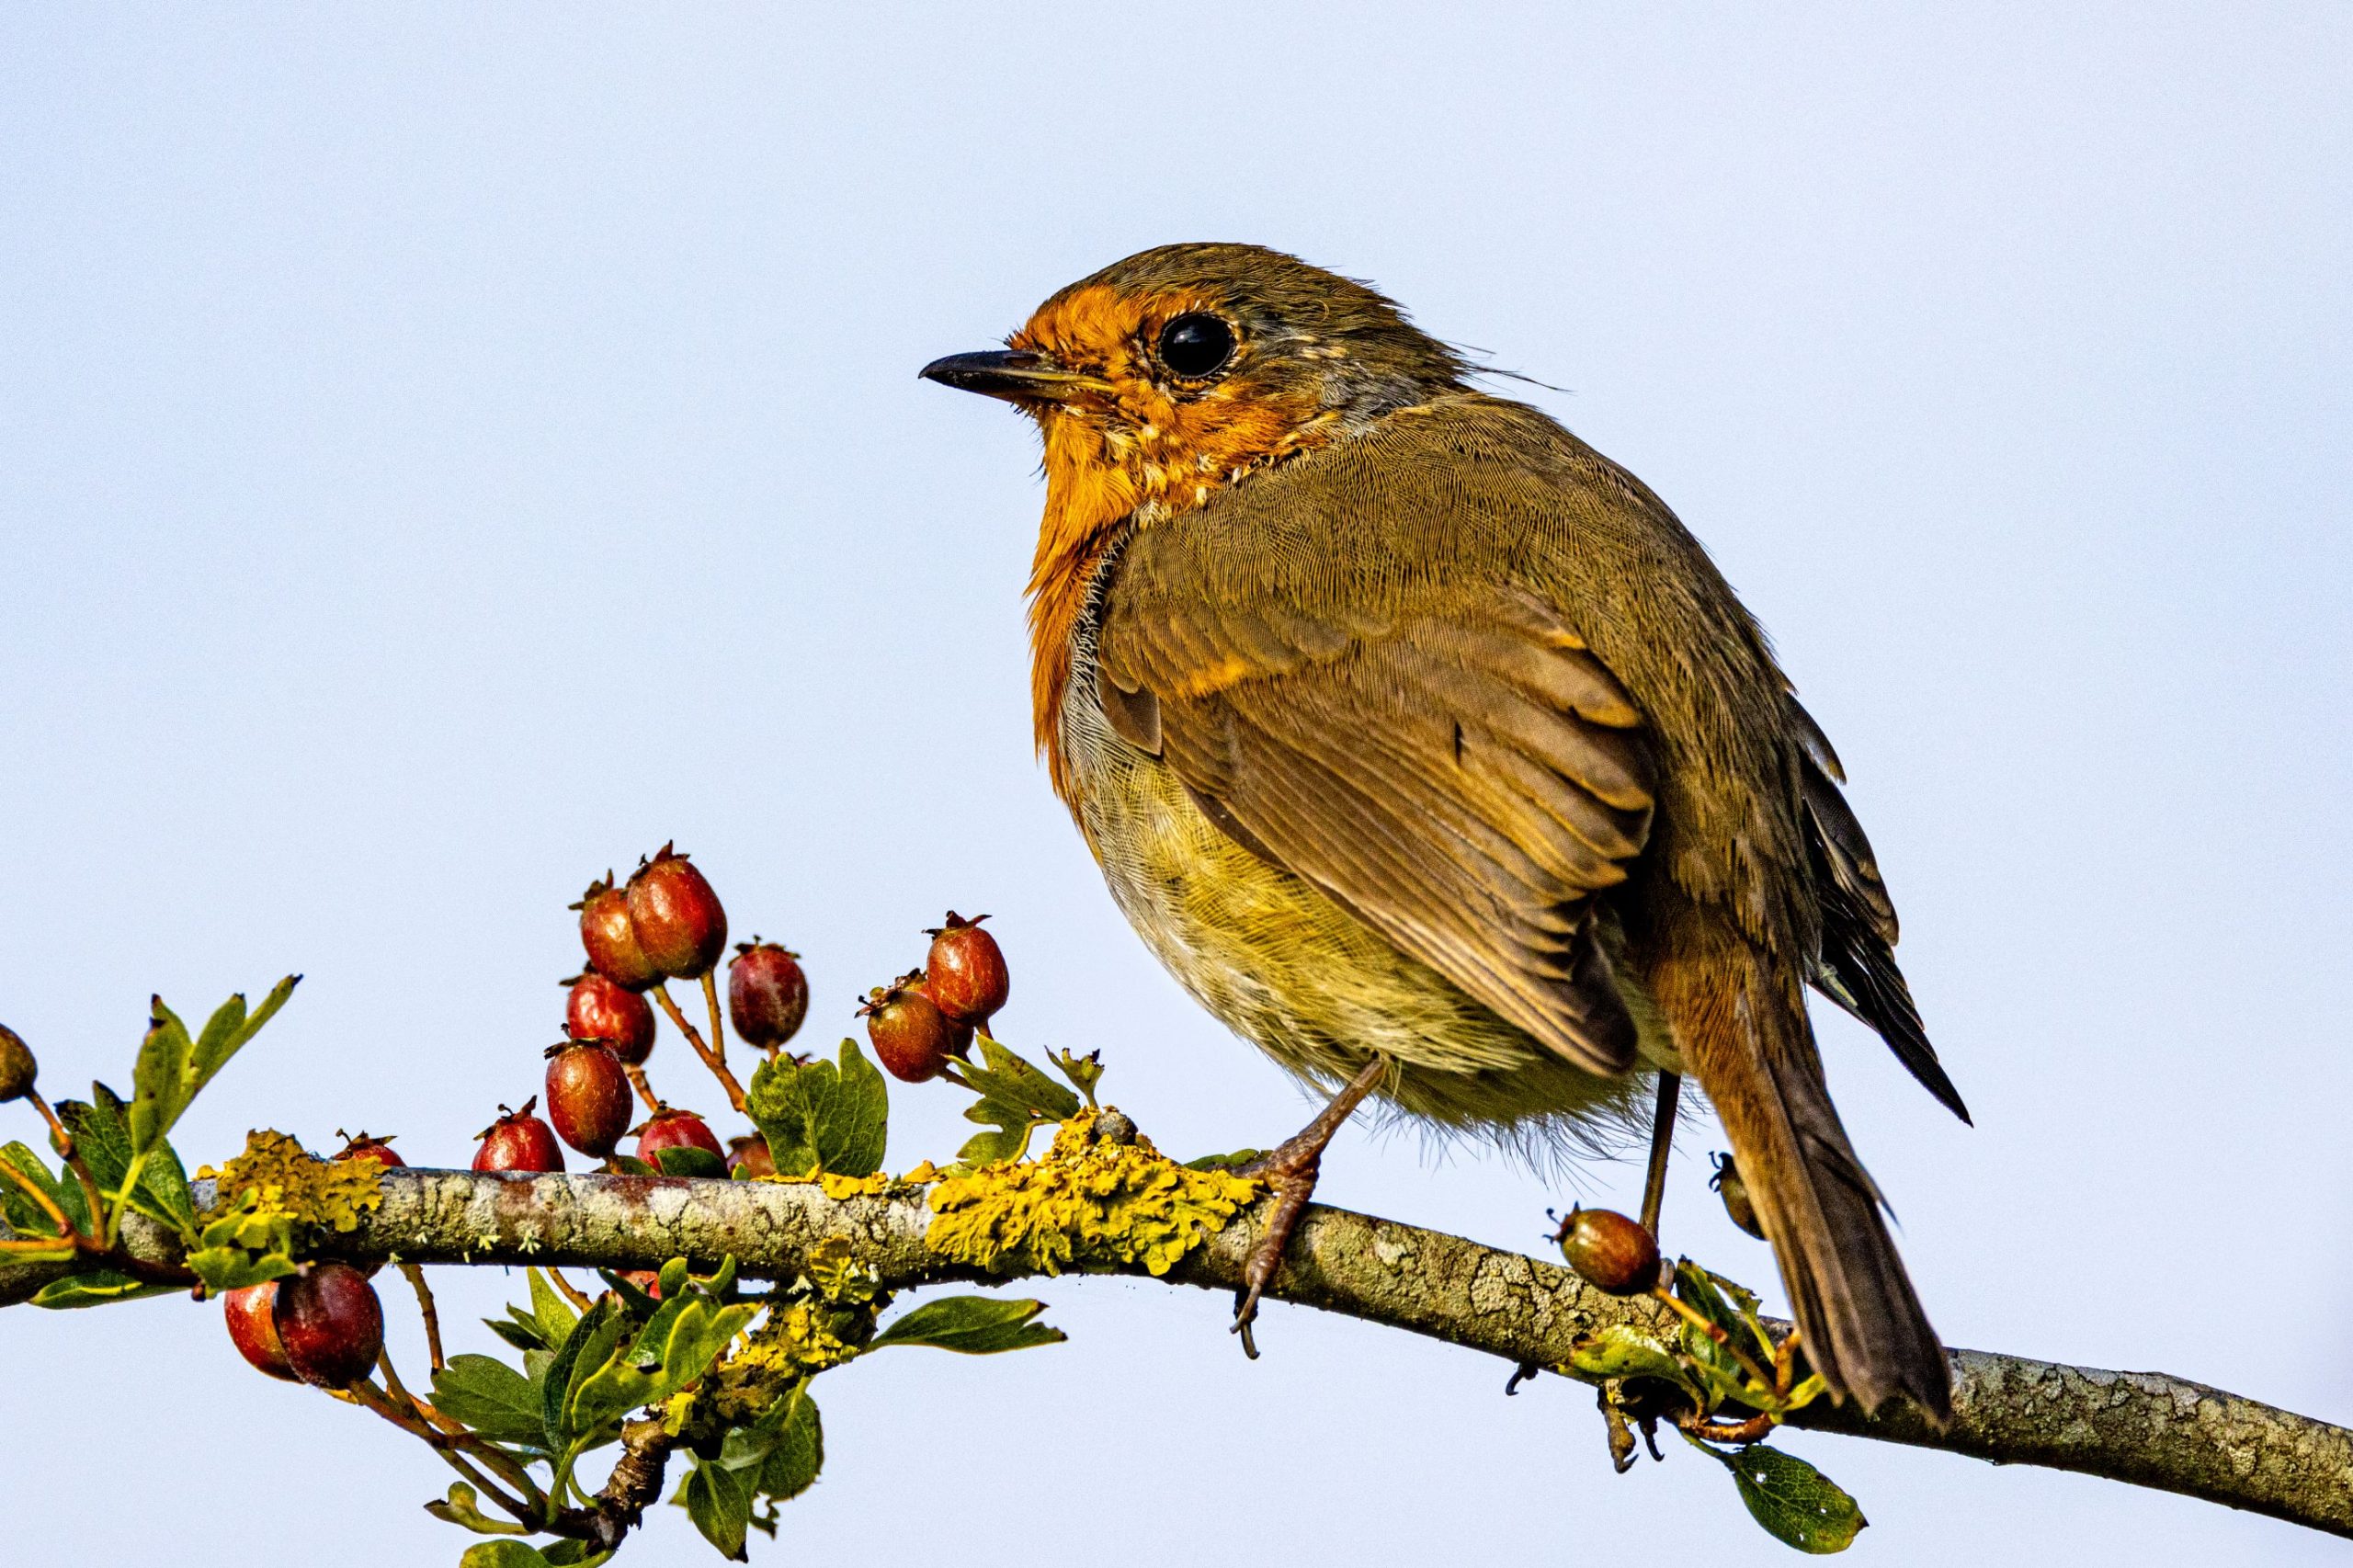 A Robin perched on a branch with red berries